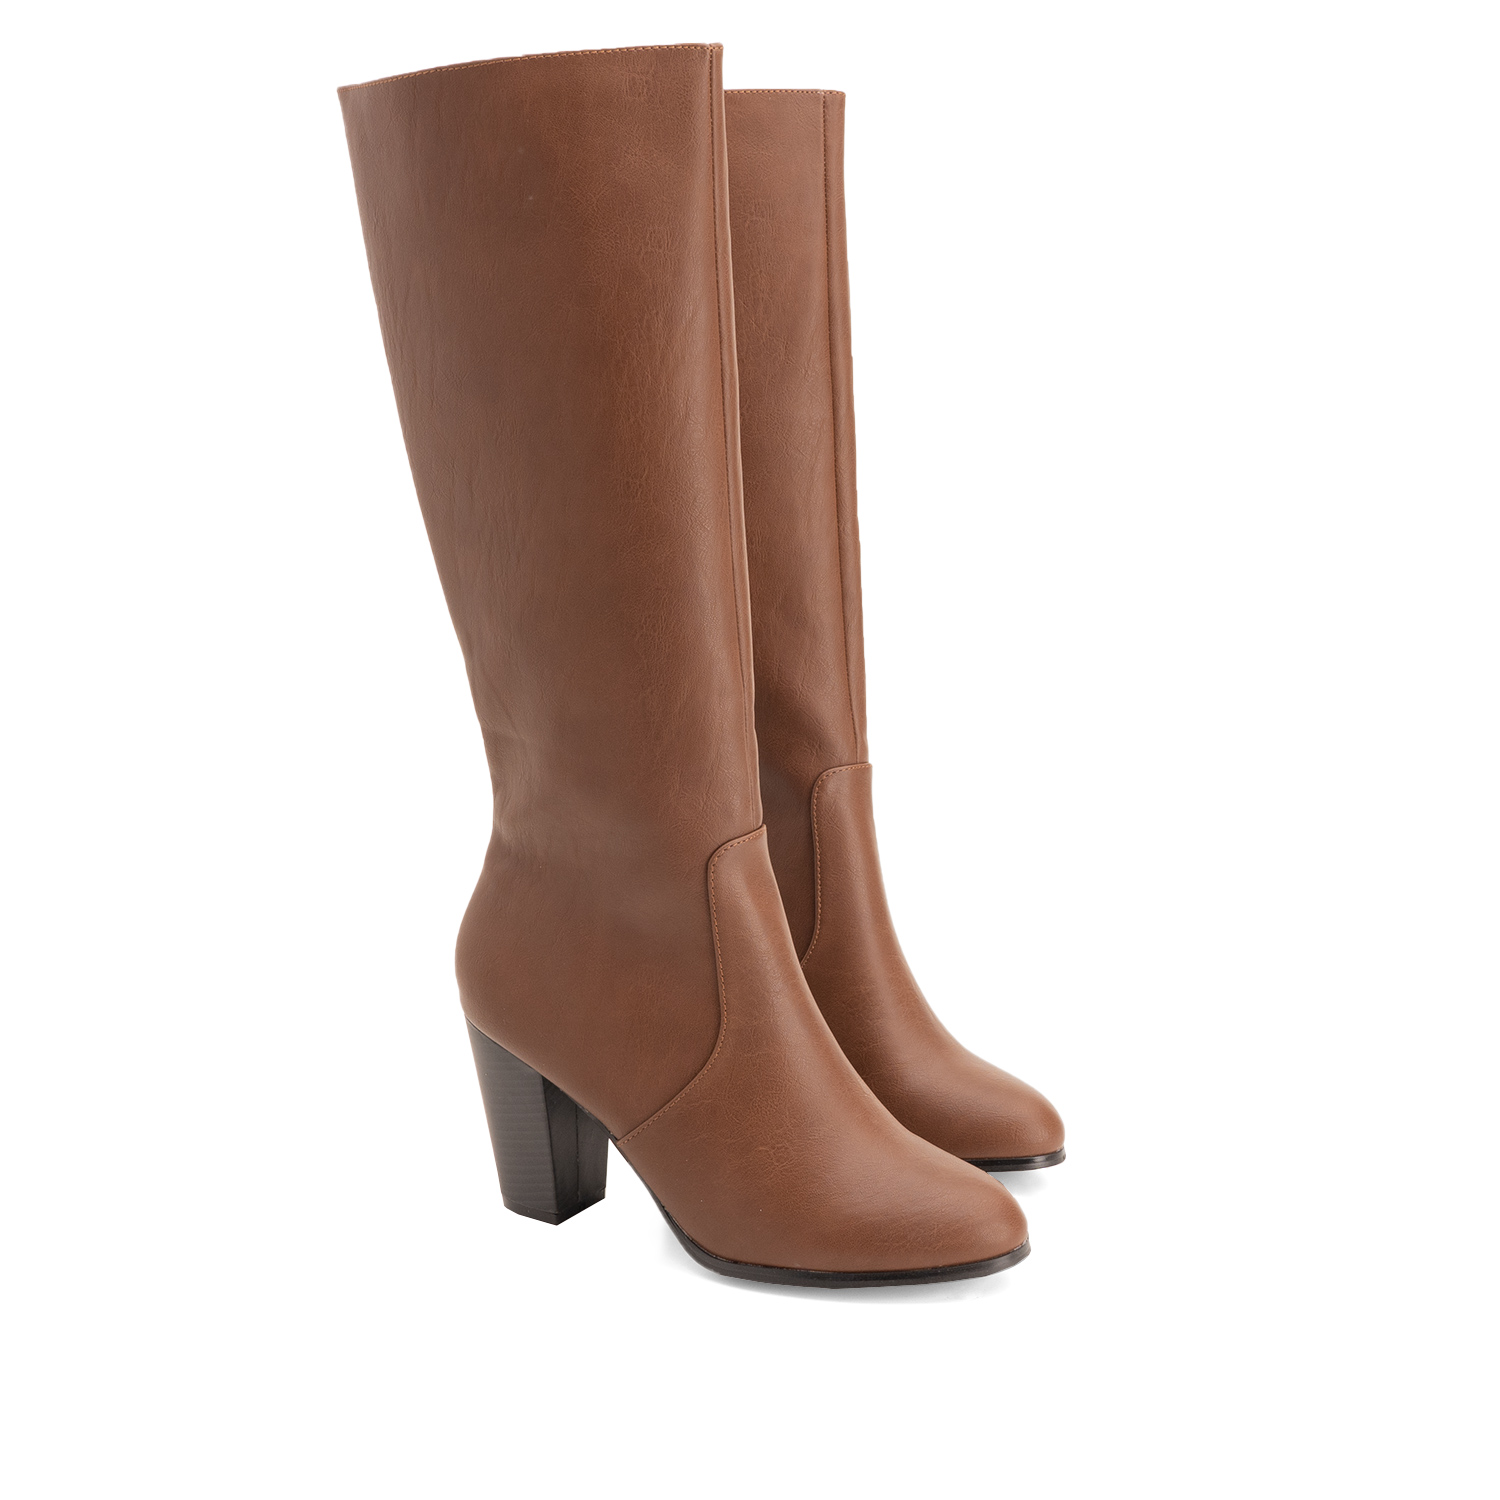 Heled mid-calf boots in brown faux leather 